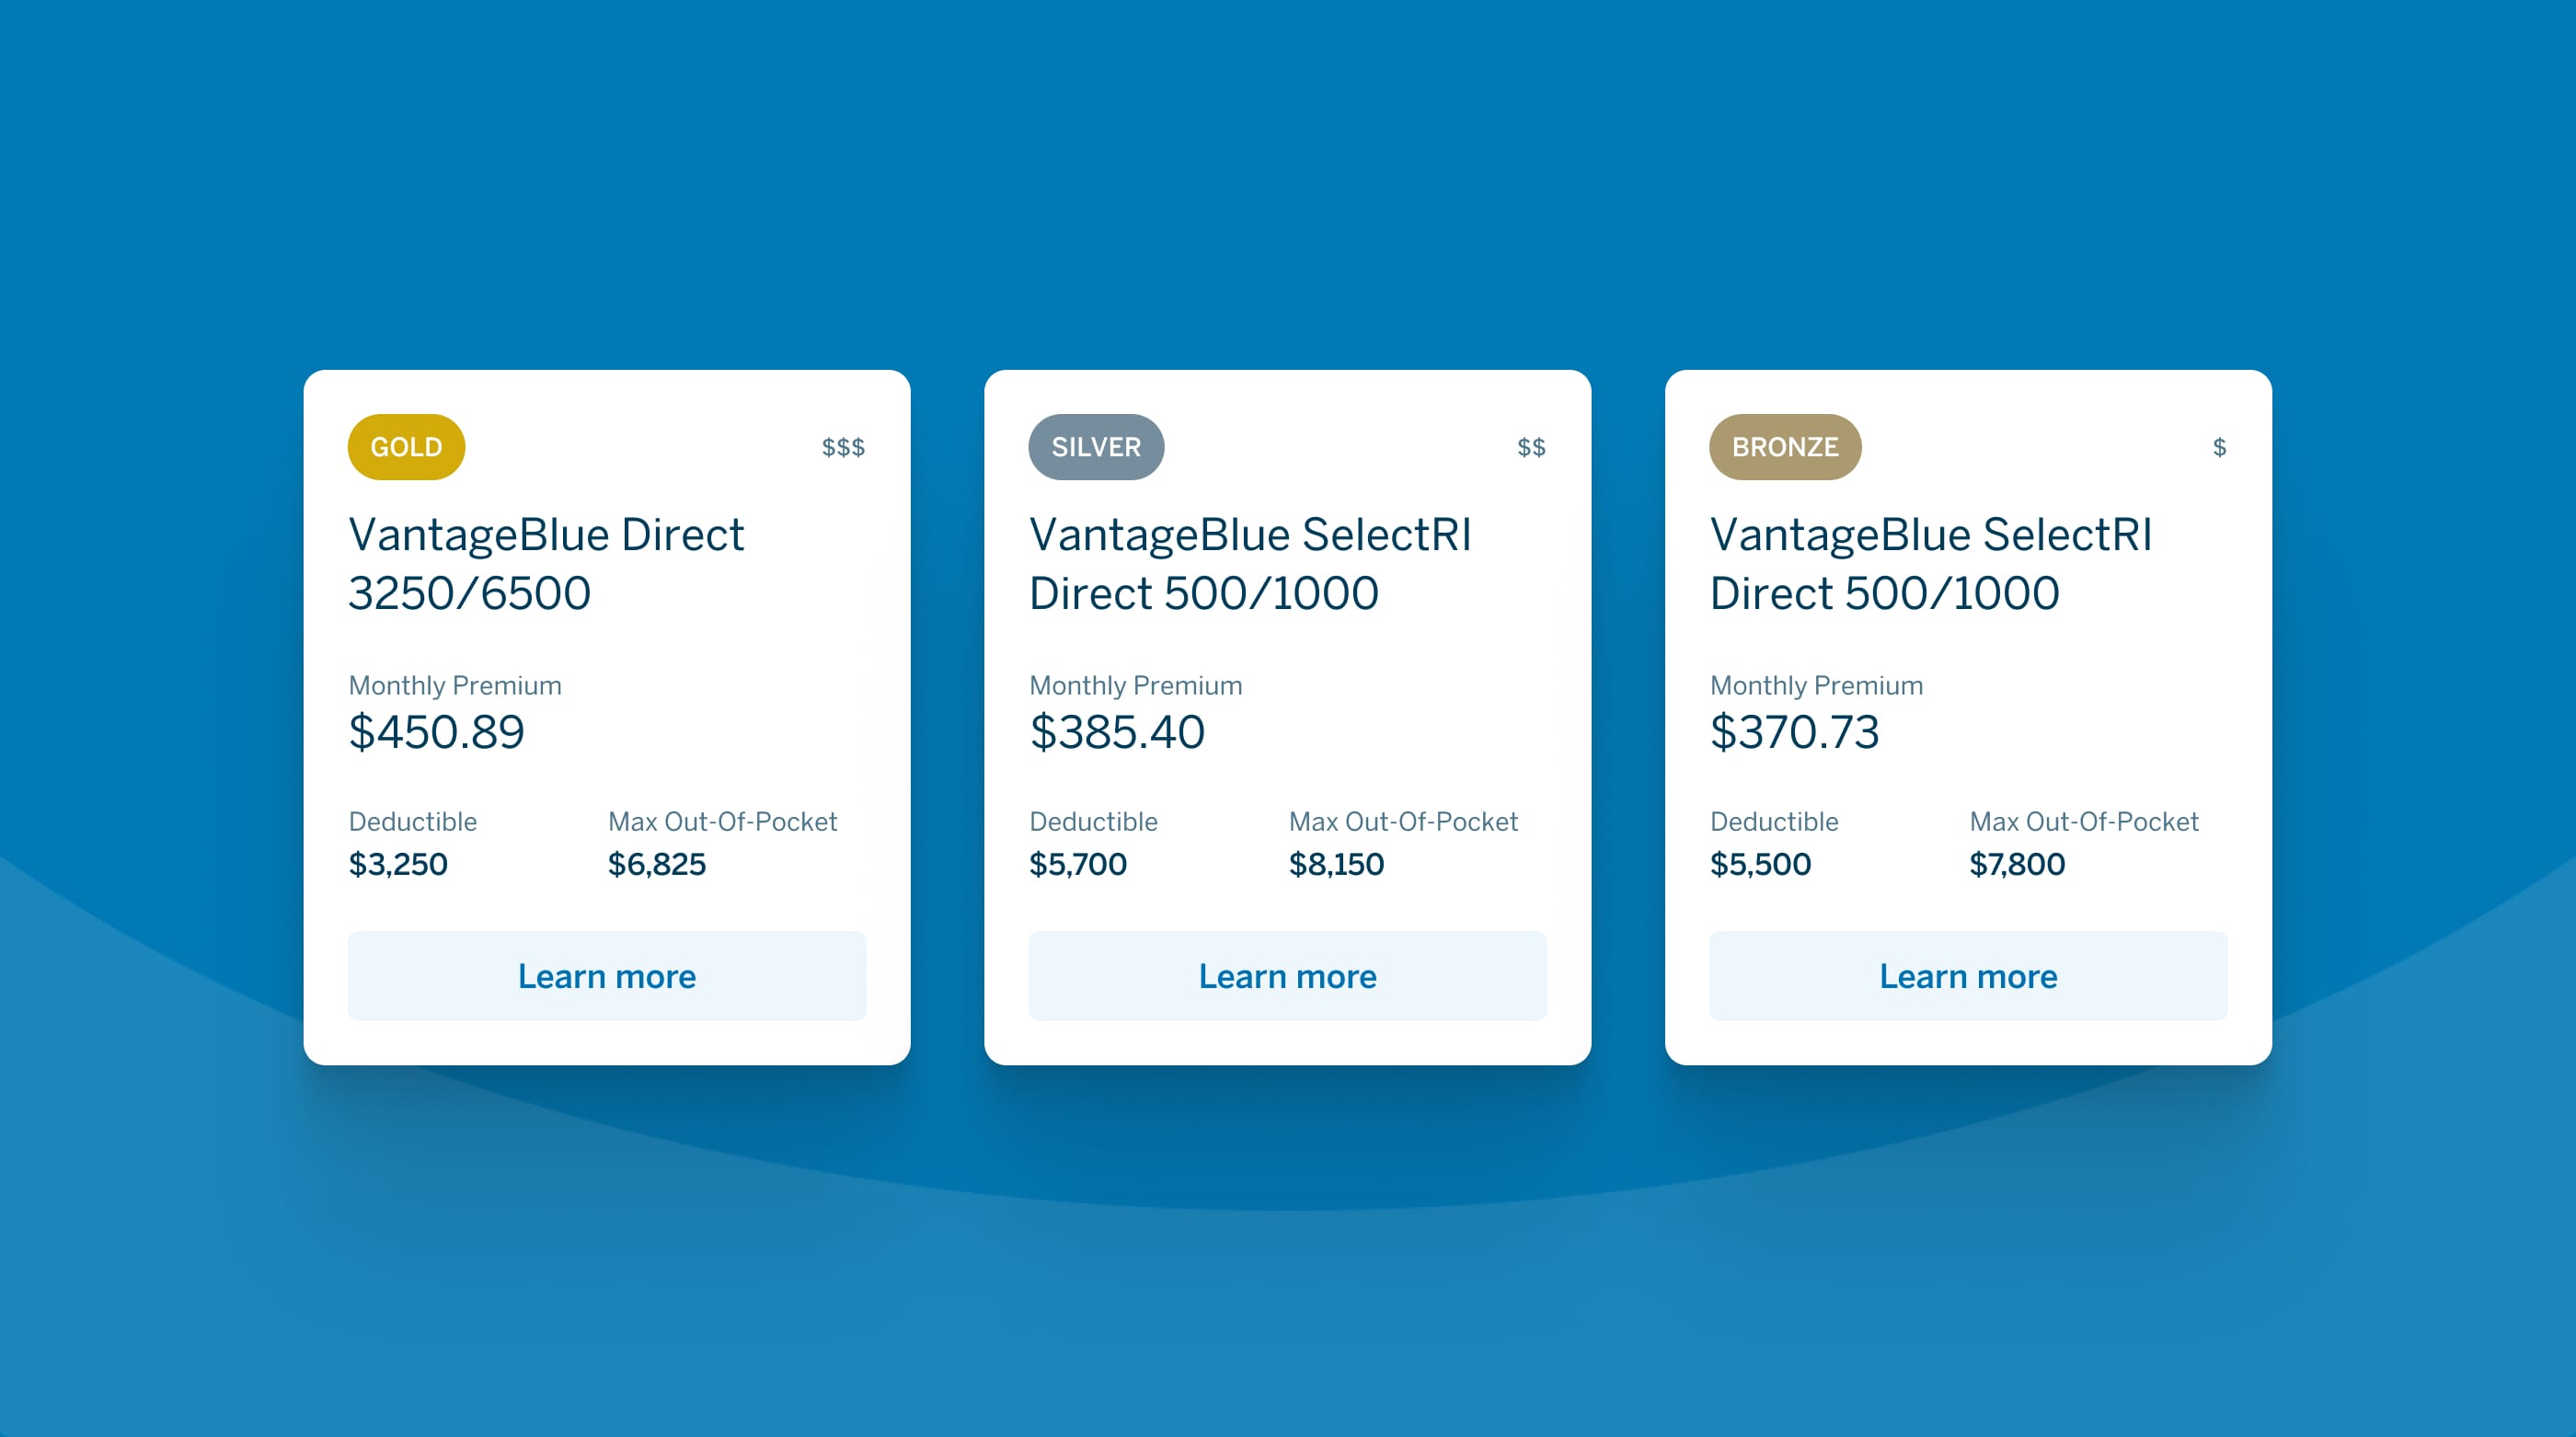 UI design of the different plans users can choose from.